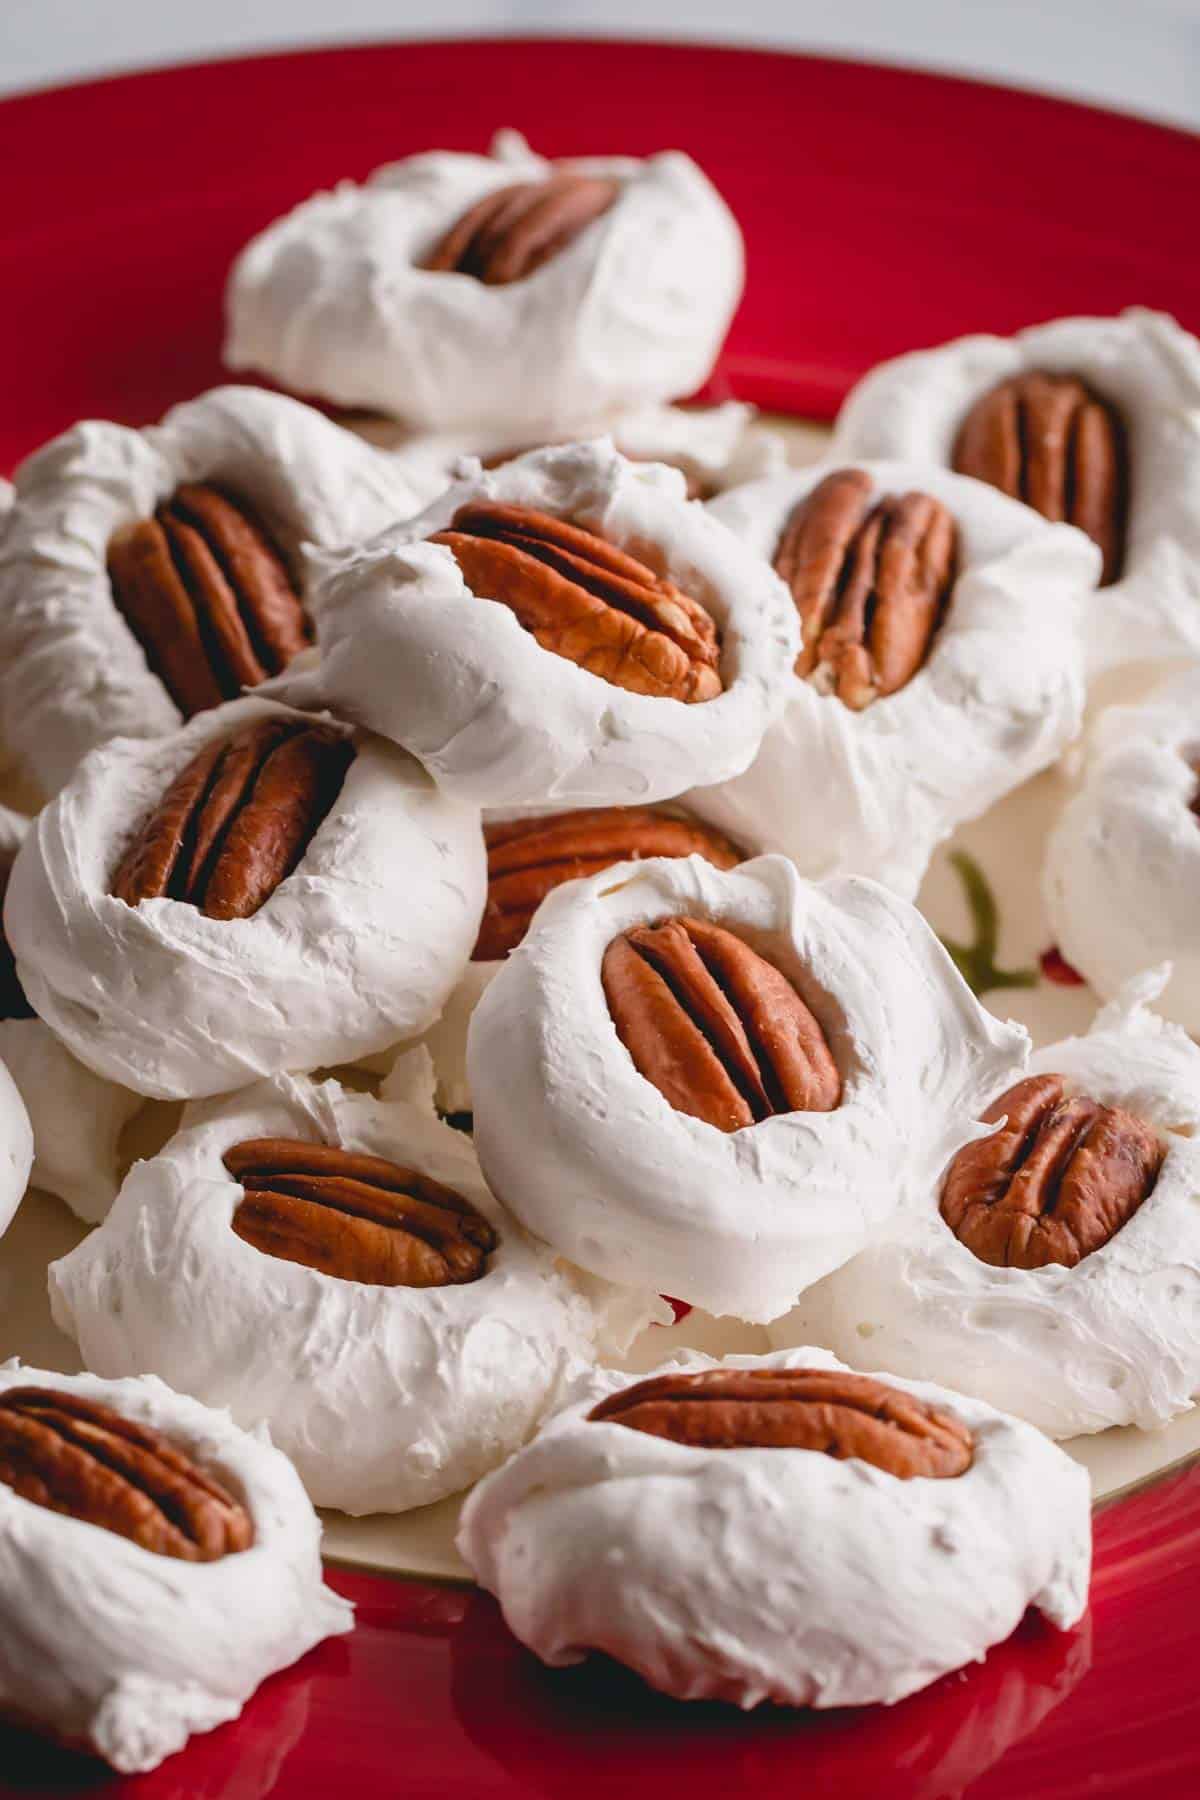 A pile of divinity with pecan halves on top on a red plate.